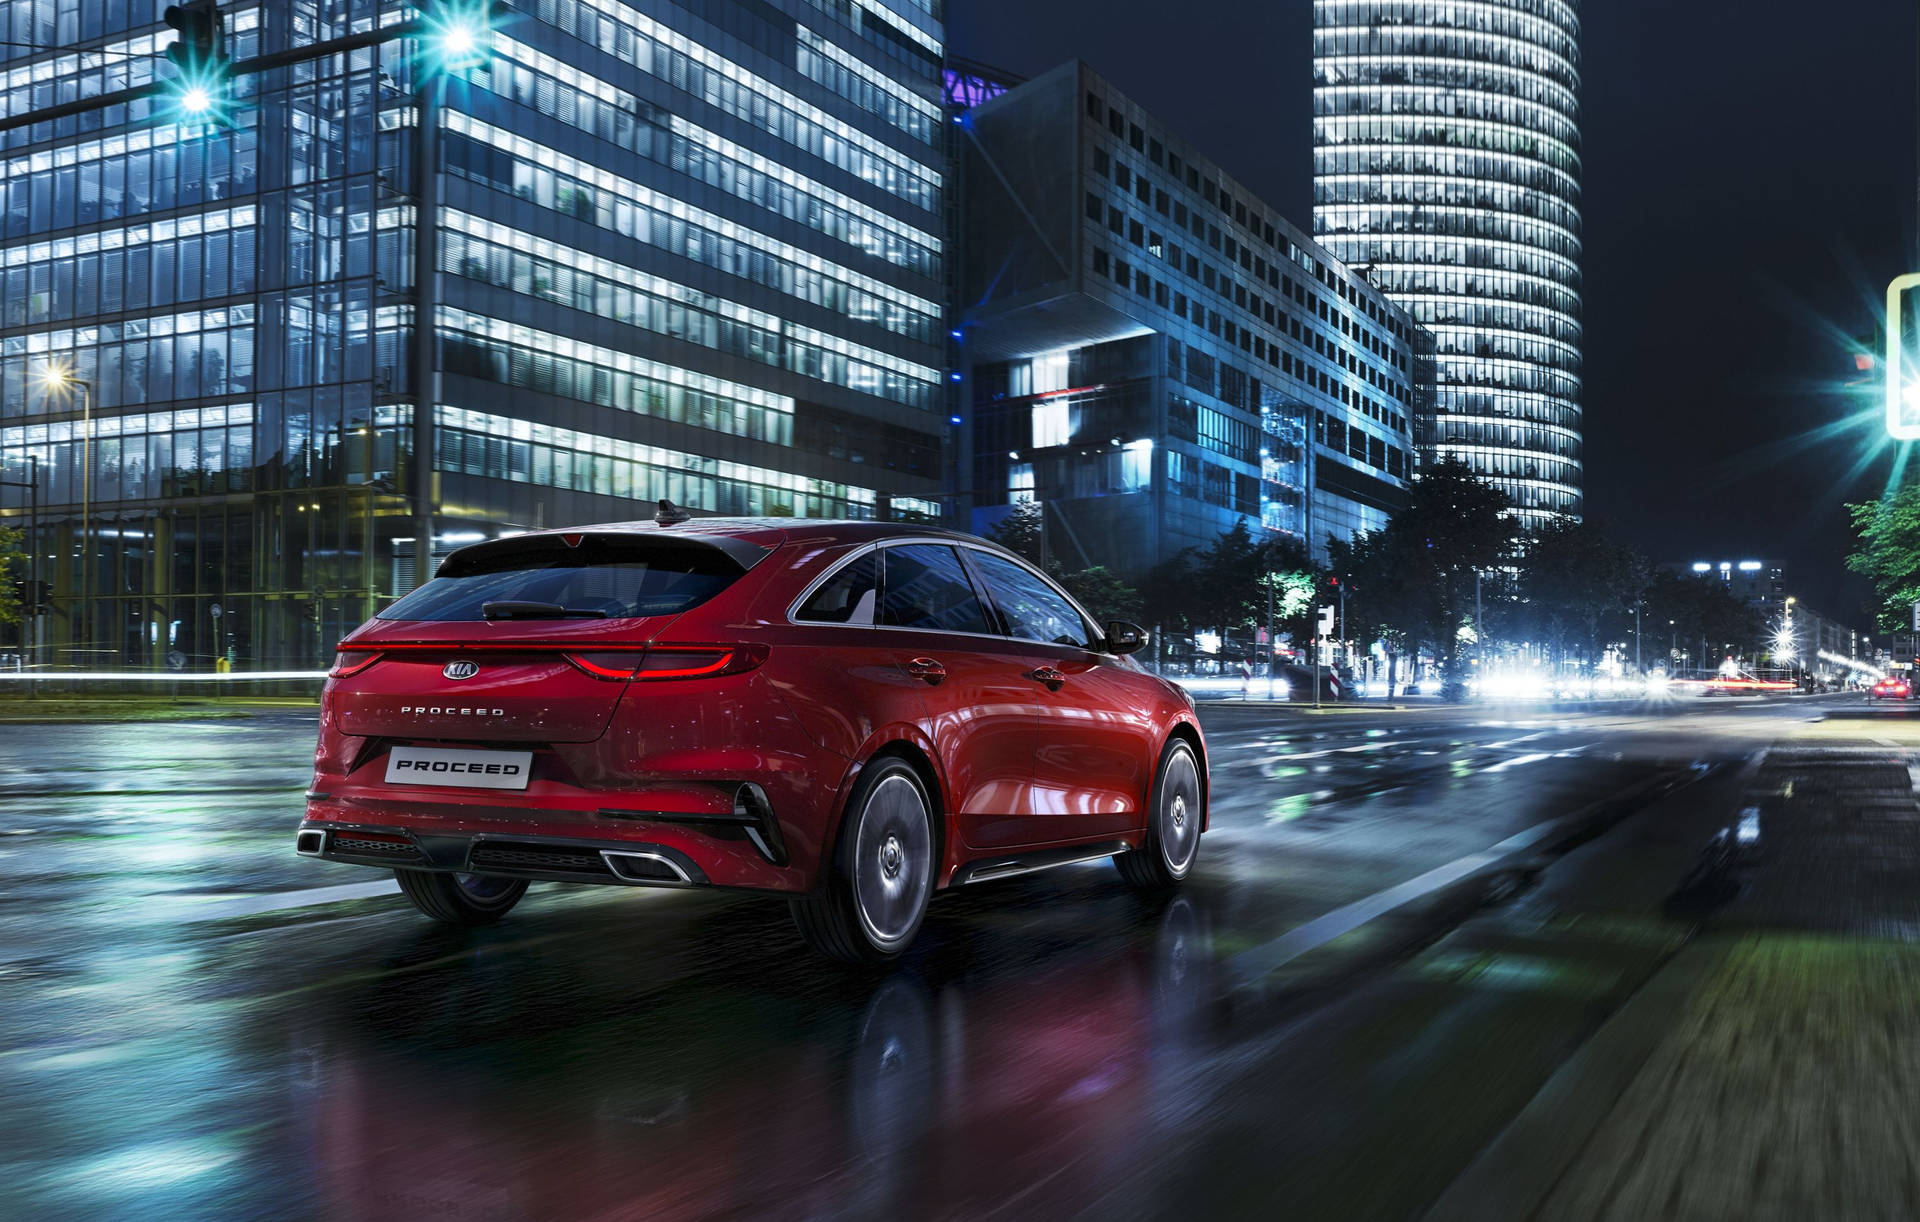 Kia Proceed Picture, Photo, Wallpaper Background